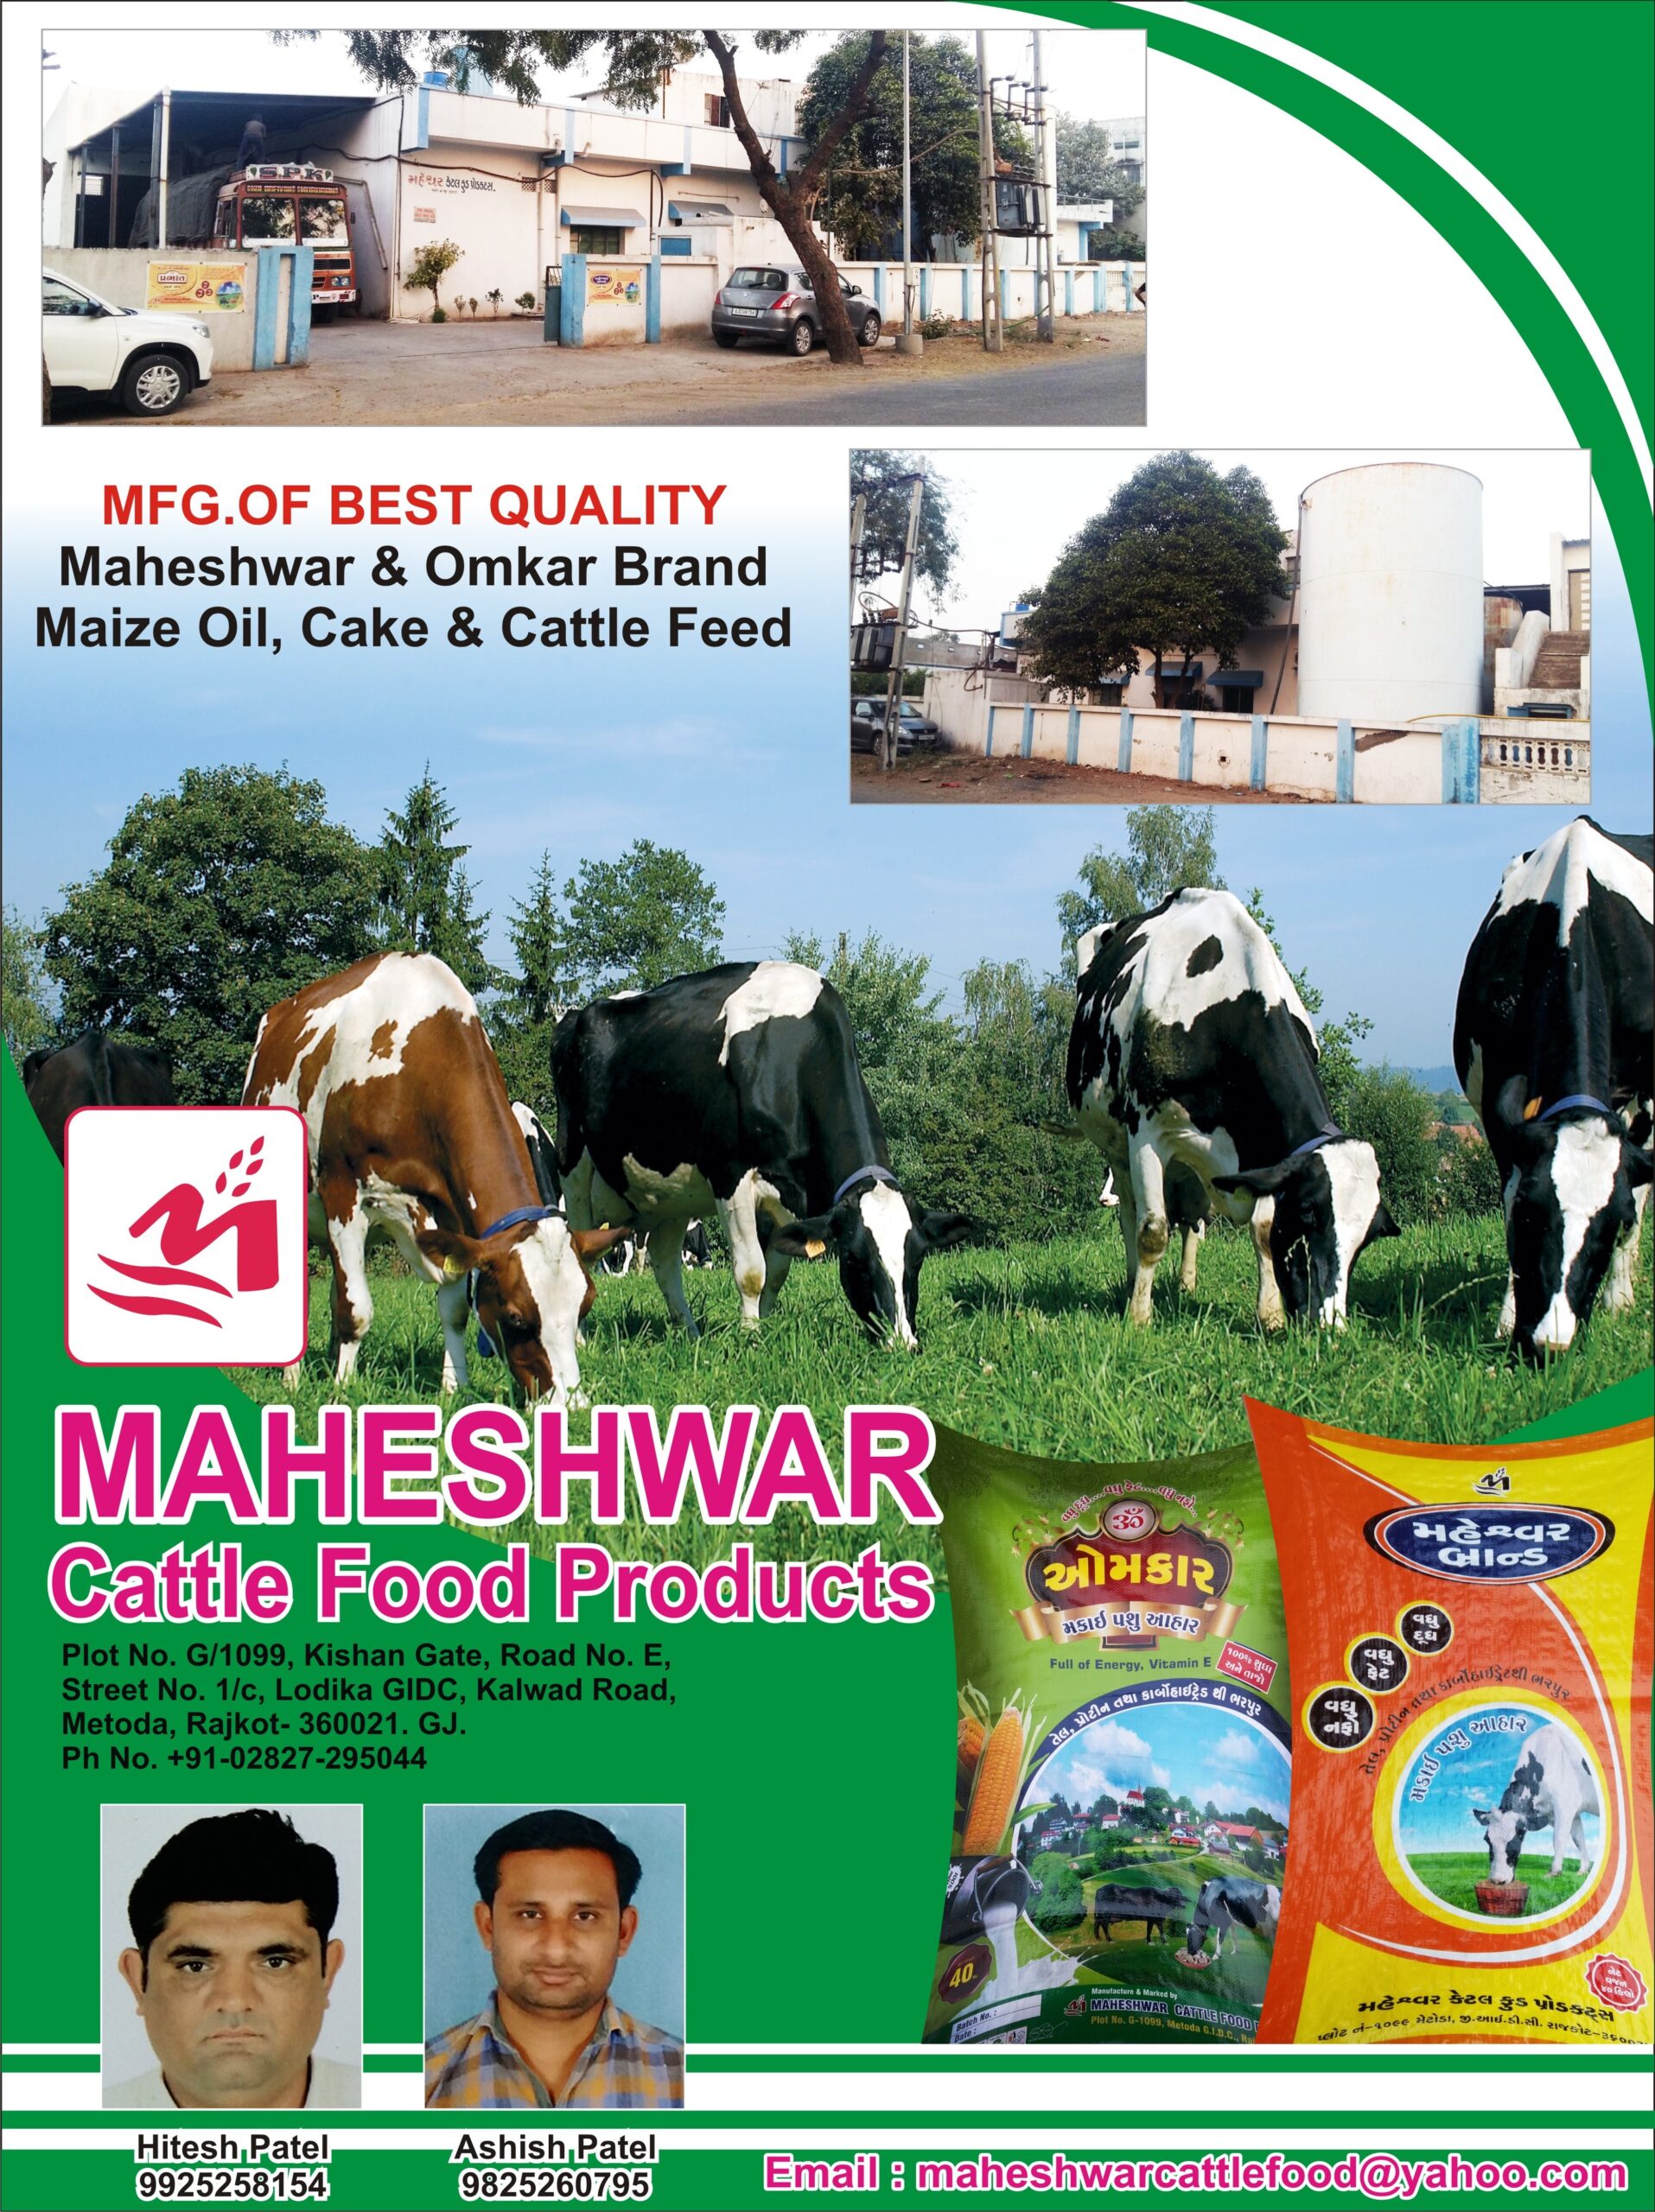 Maheshwar Cattle Foods Products